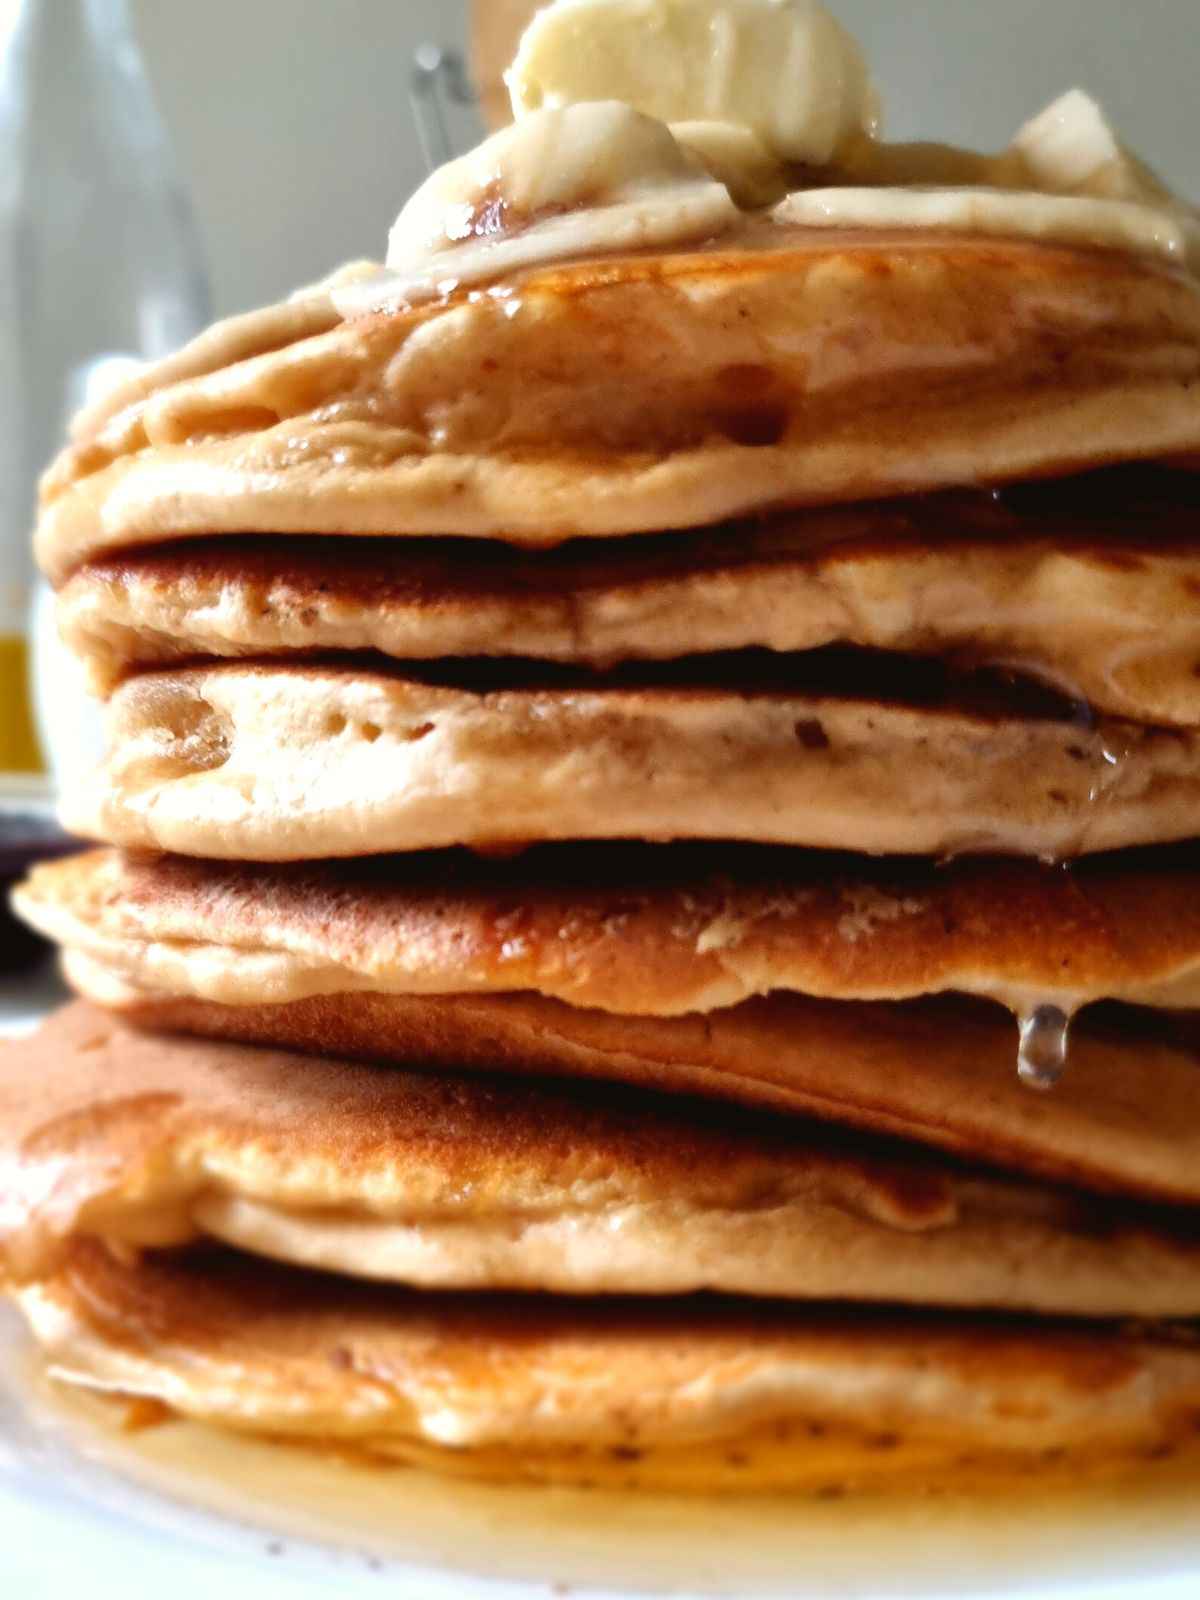 Gluten-free american pancakes stacked in a tall towel.